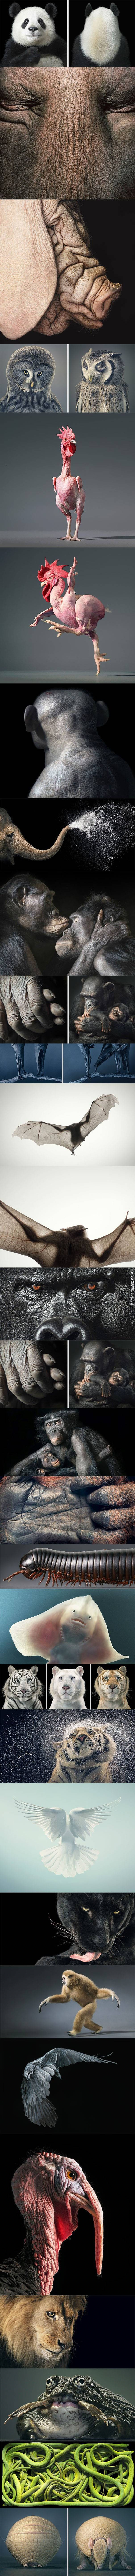 Photography+by+Tim+Flach.